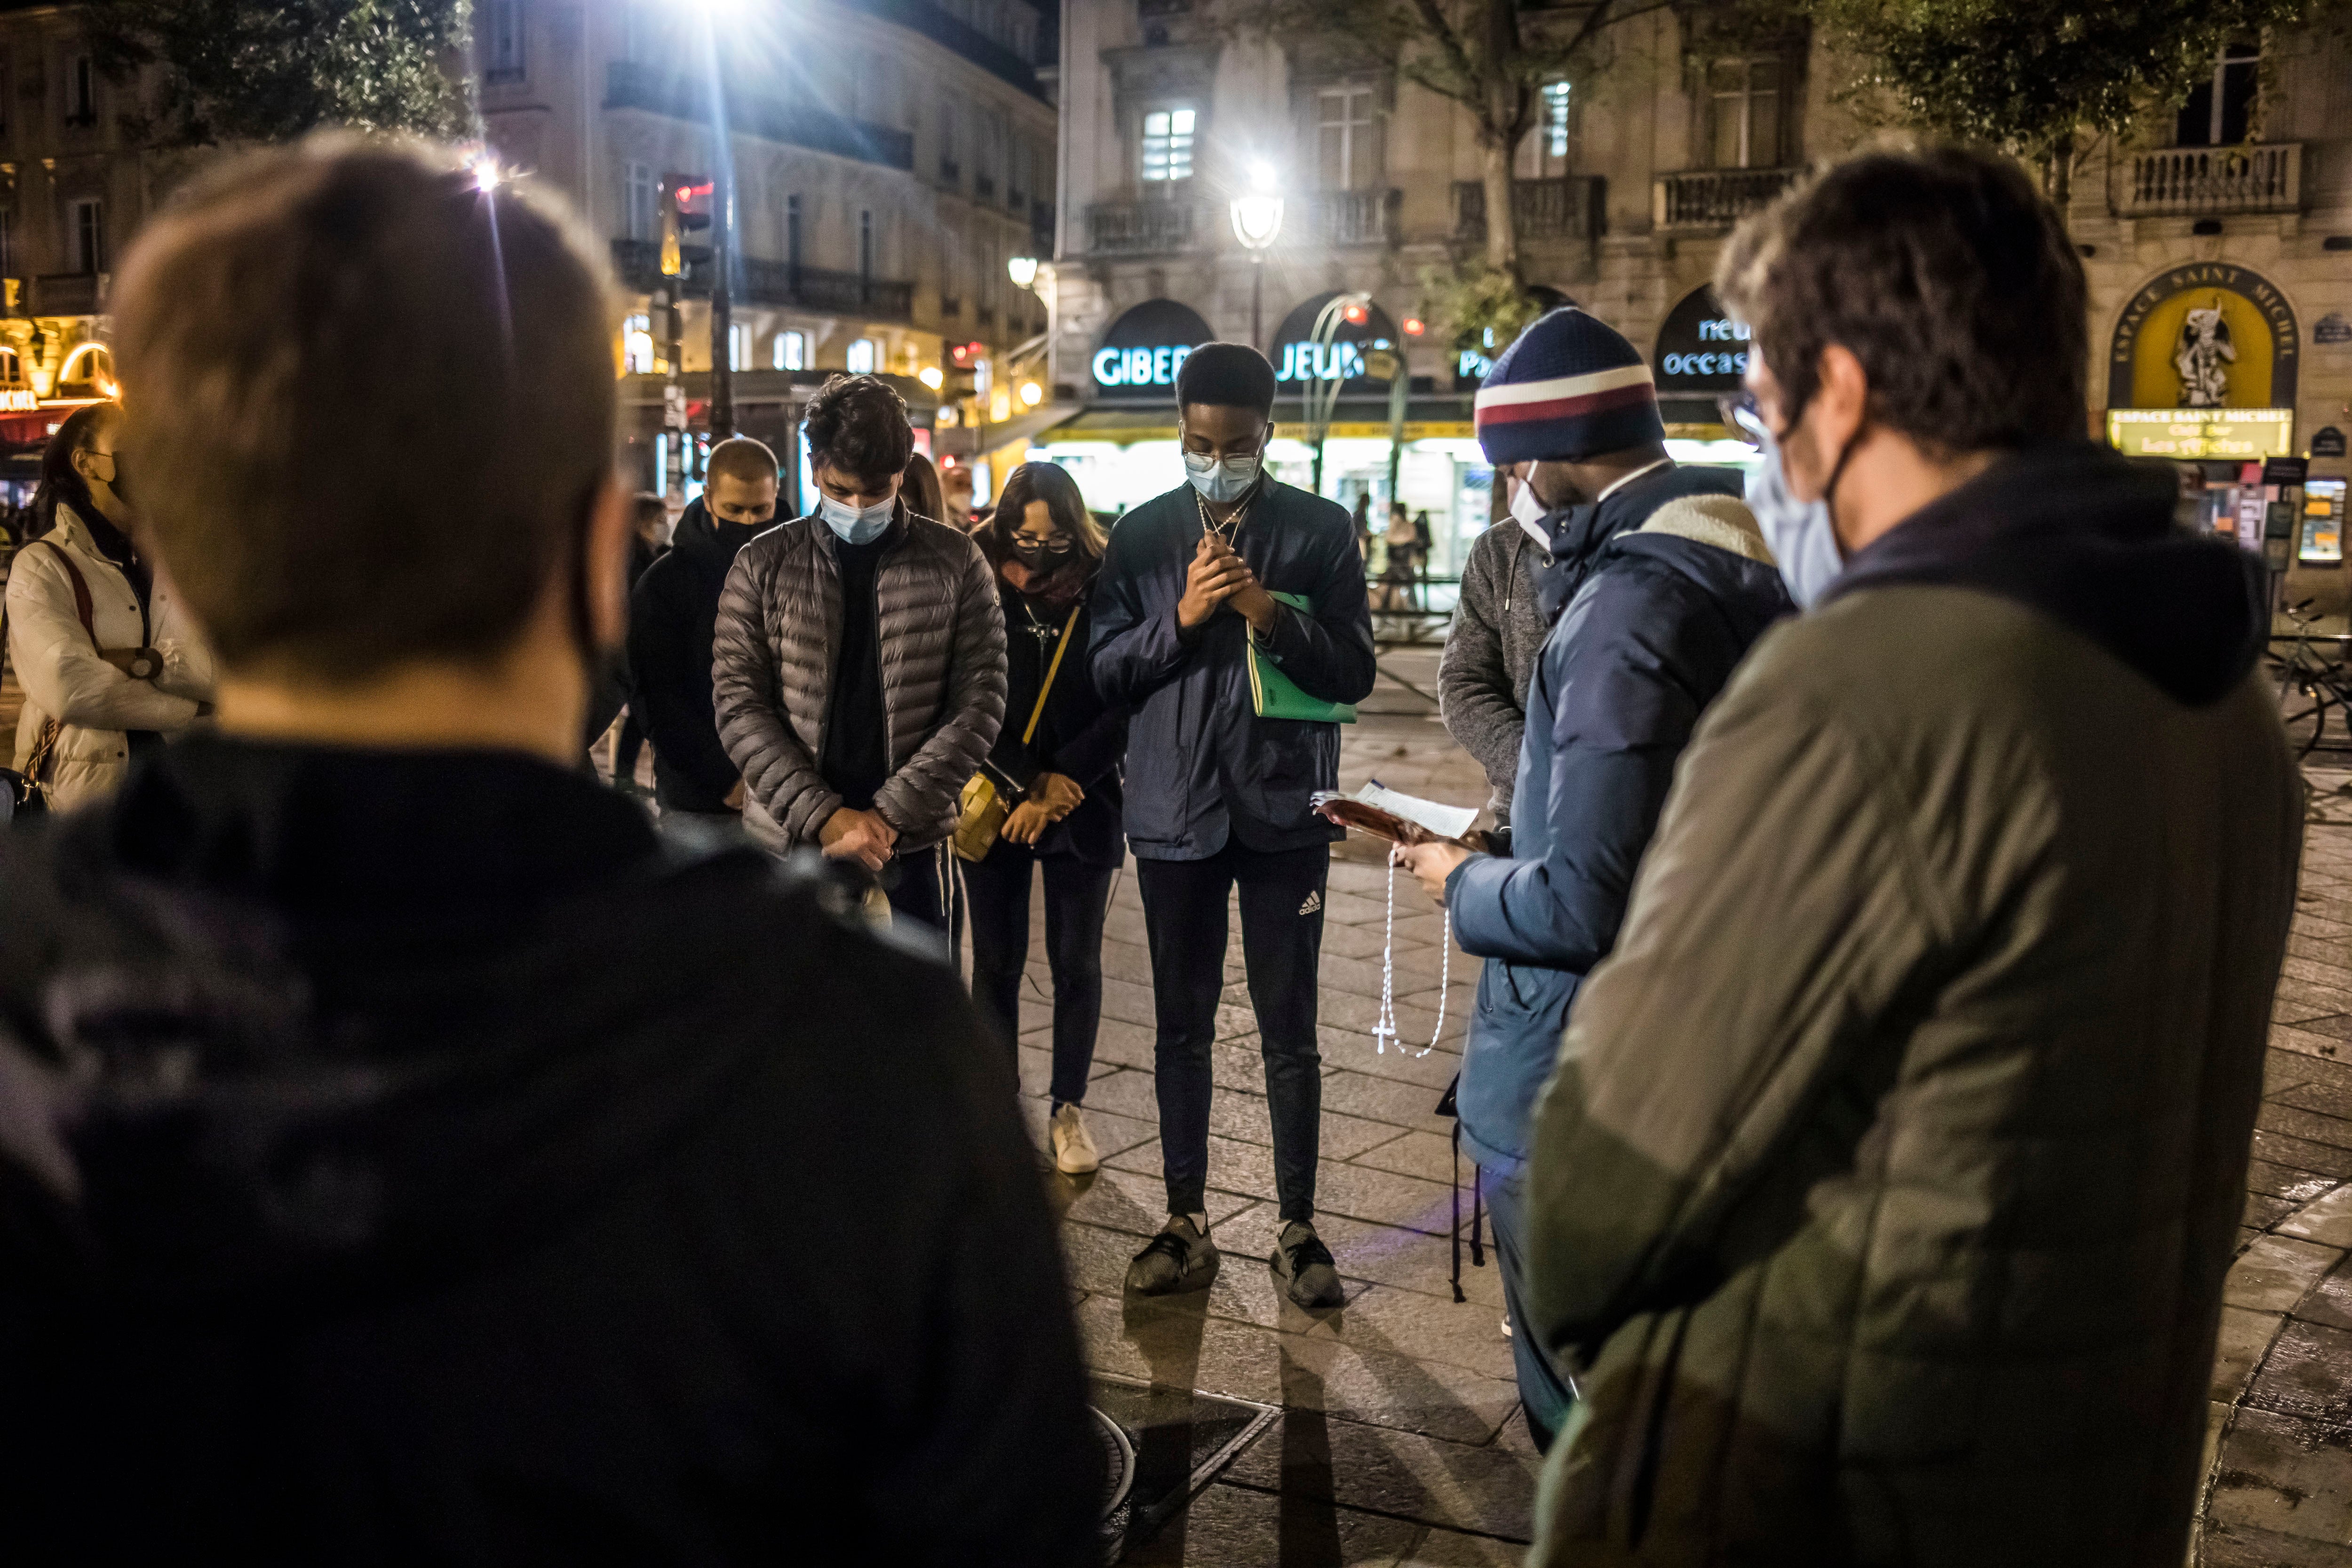 A group of young Catholics pray for the victims of the Nice attack, which took place yesterday, on the final evening of being allowed to gather outside